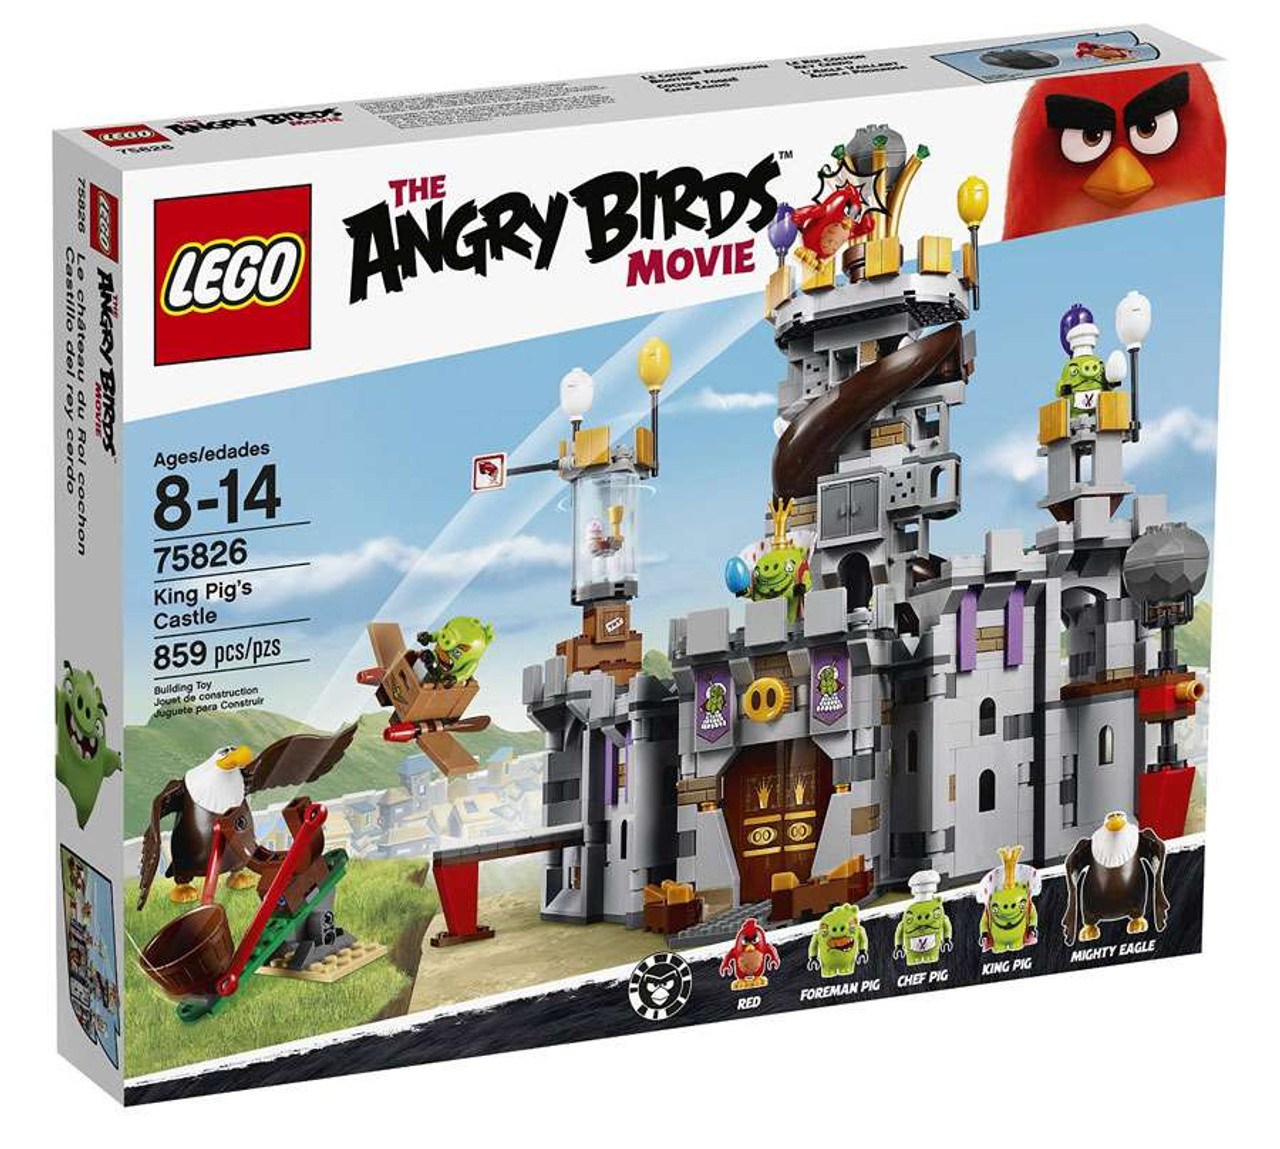 LEGO ANGRY BIRDS MIGHTY EAGLE "THE MOIVE" FROM SET 75826 NEW